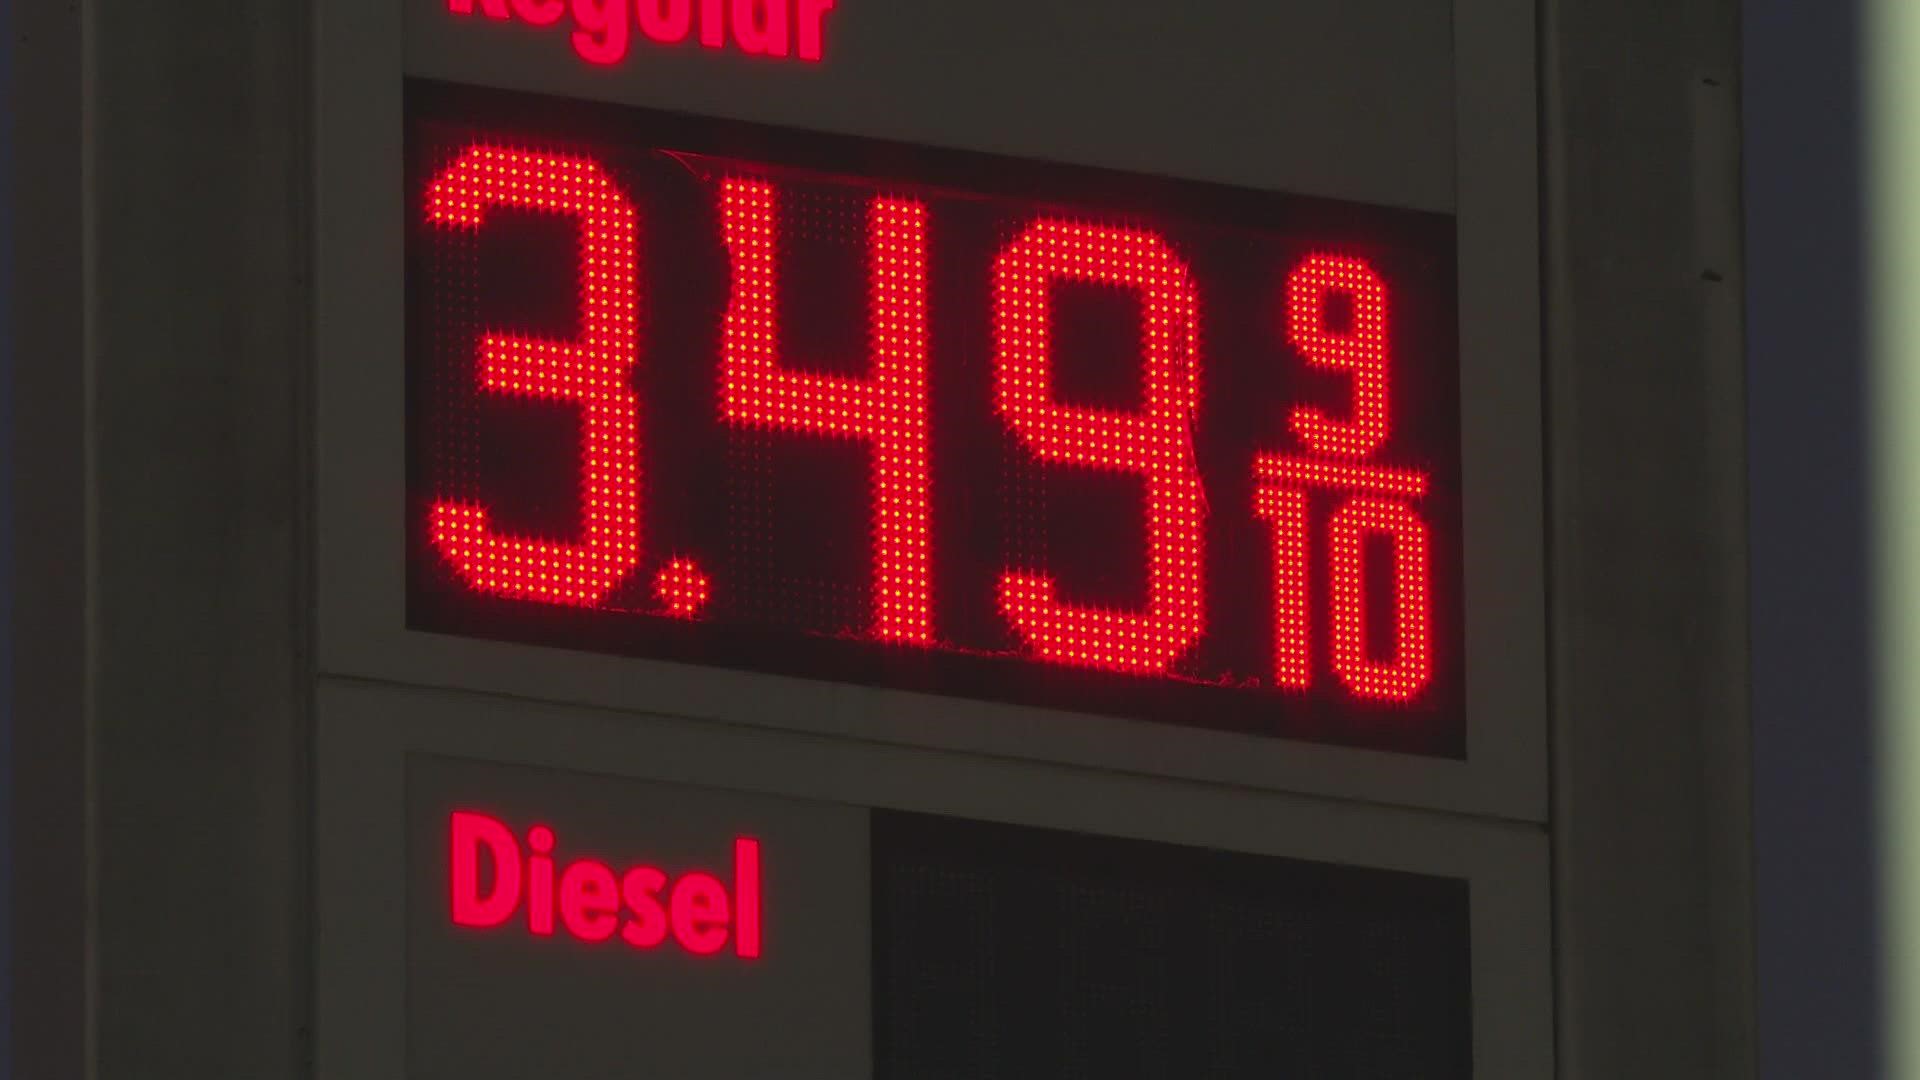 A decision by OPEC had ripple effects on gas prices across the Piedmont Triad.